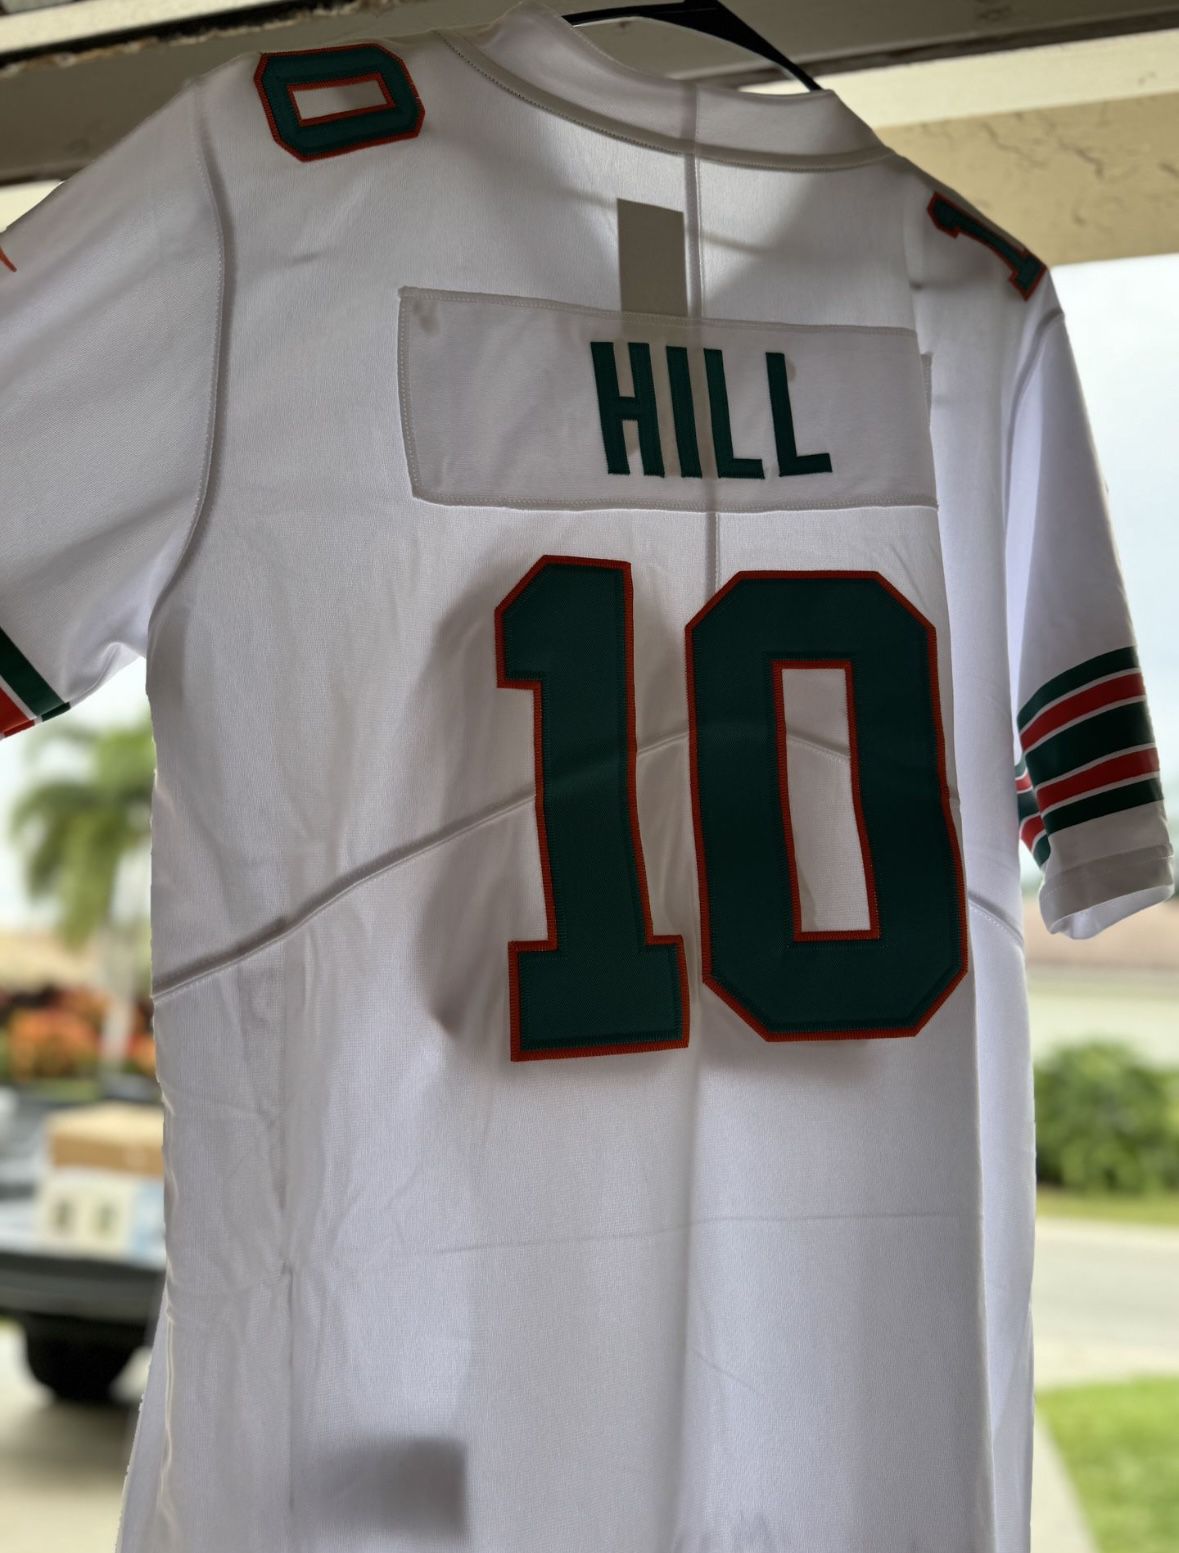 Hill Dolphins Jersey